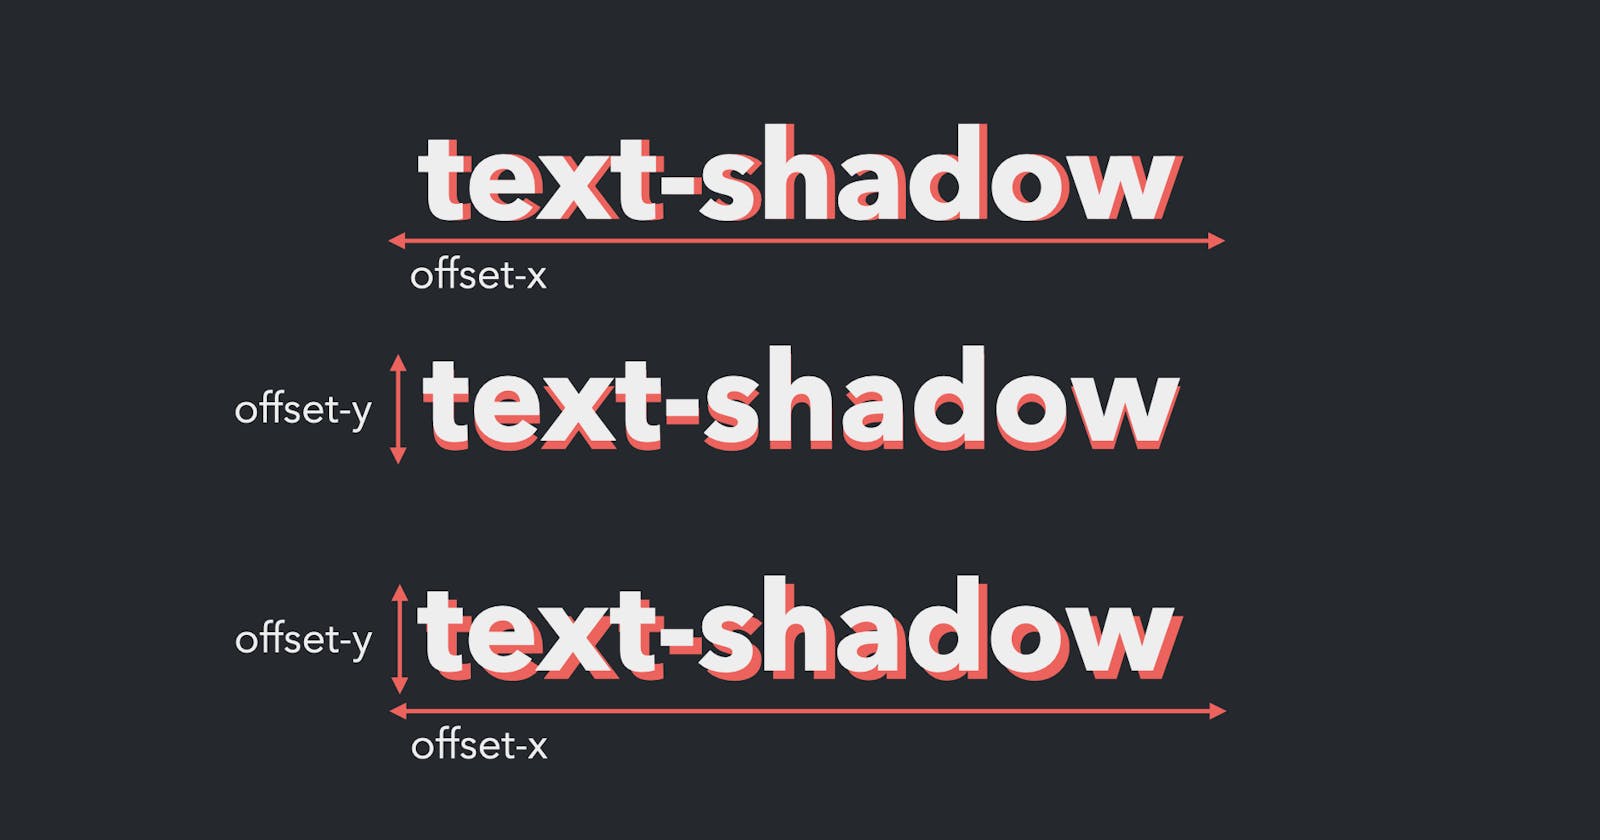 The text-shadow CSS Property